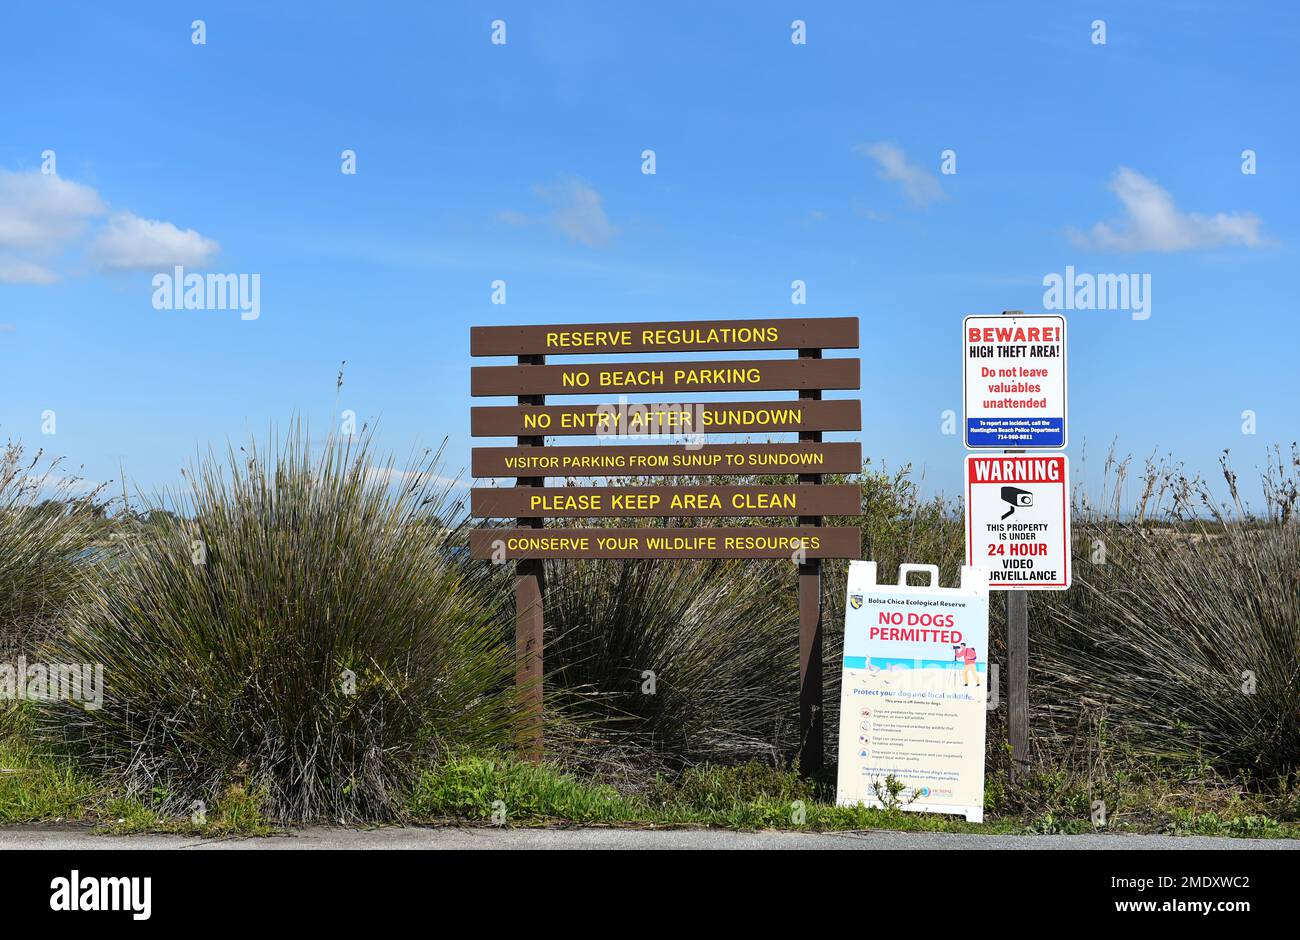 HUNTINGTON BEACH, CALIFORNIA - 18 JAN 2023: Sign at the Bolsa Chica Ecological Reserve, the largest saltwater marsh along the coast of California. Stock Photo